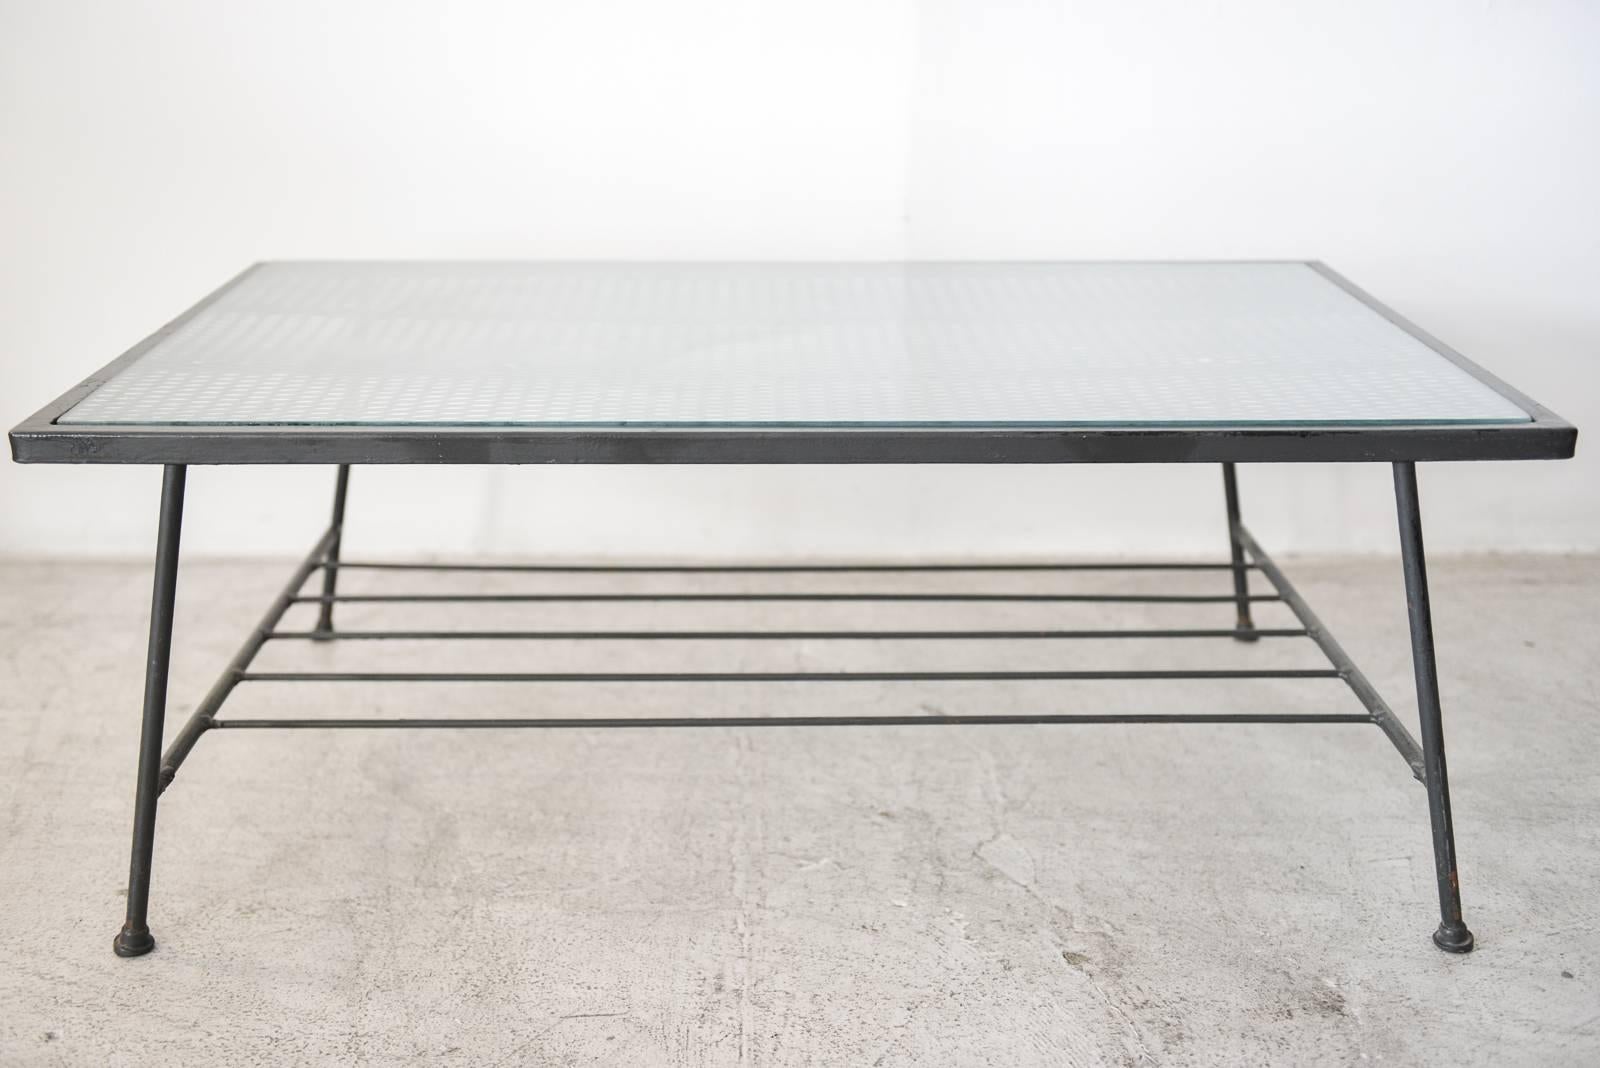 Iron and glass coffee table by Inco Company of California, circa 1955. Excellent original condition. Includes original glass. Could be used indoors or outdoors as patio furniture.

Can be seen in our showroom at MODERN VAULT, 361 Old Newport Blvd,